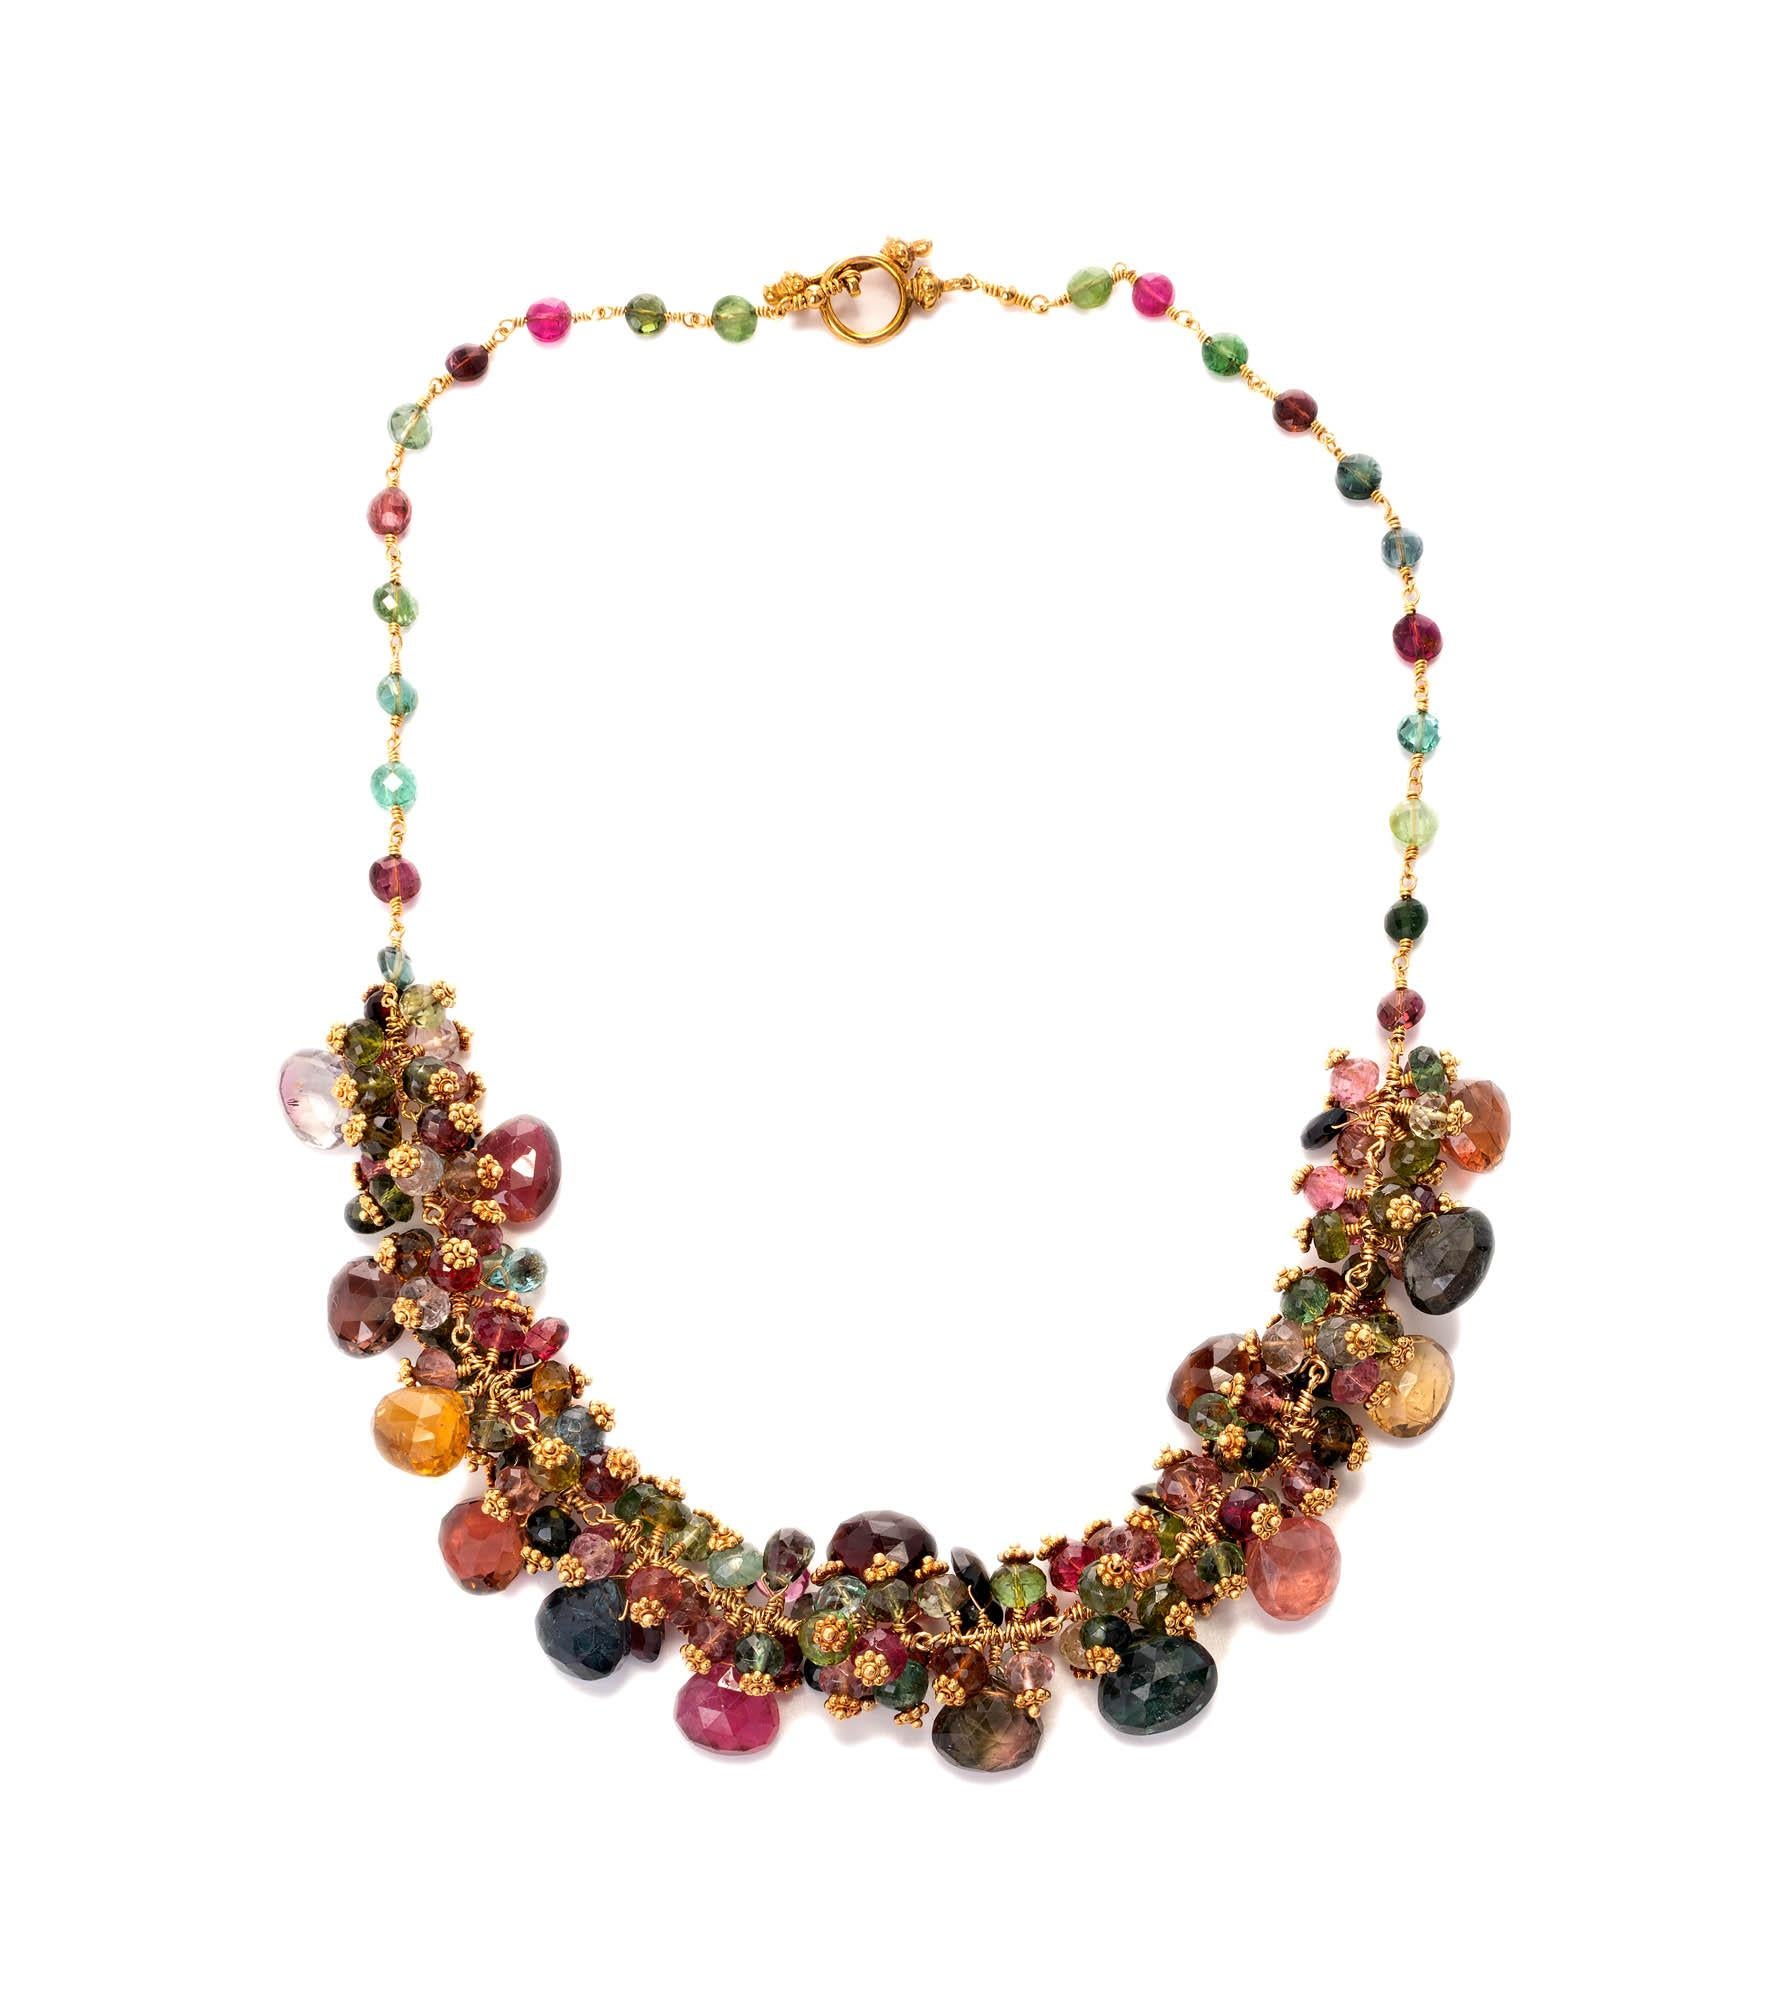 Handmade 185.00 Carat Tourmaline Gold Necklace. Multi-color Tourmaline's.  Purple, pink, green, blue/green, white and yellow.  22k yellow gold.

22 round tourmalines
15 oval tourmalines
135 round tourmalines
Tested: 22k yellow gold
Grams: